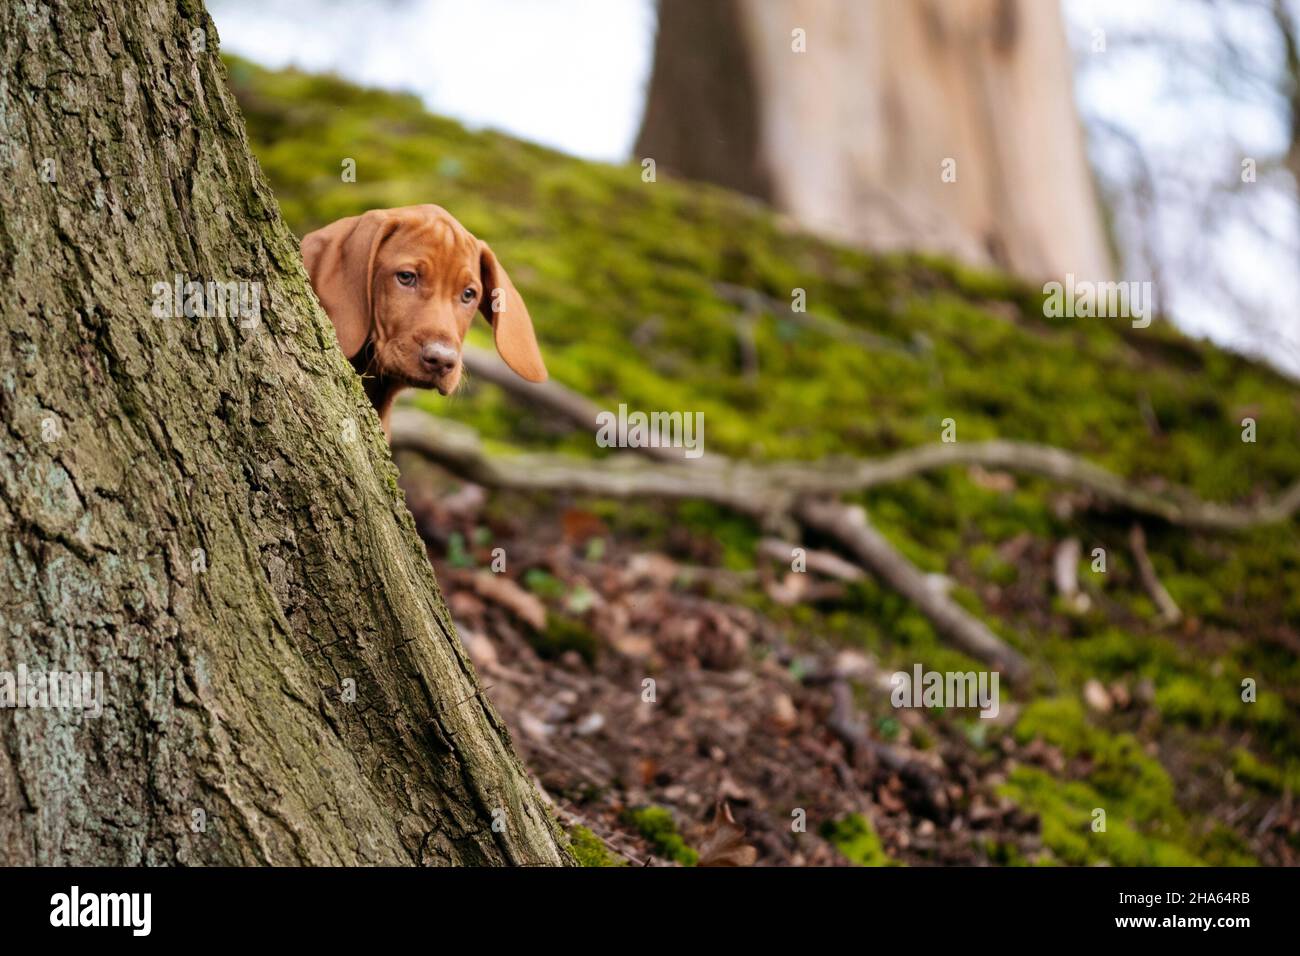 short-haired hungarian pointing dog puppy Stock Photo